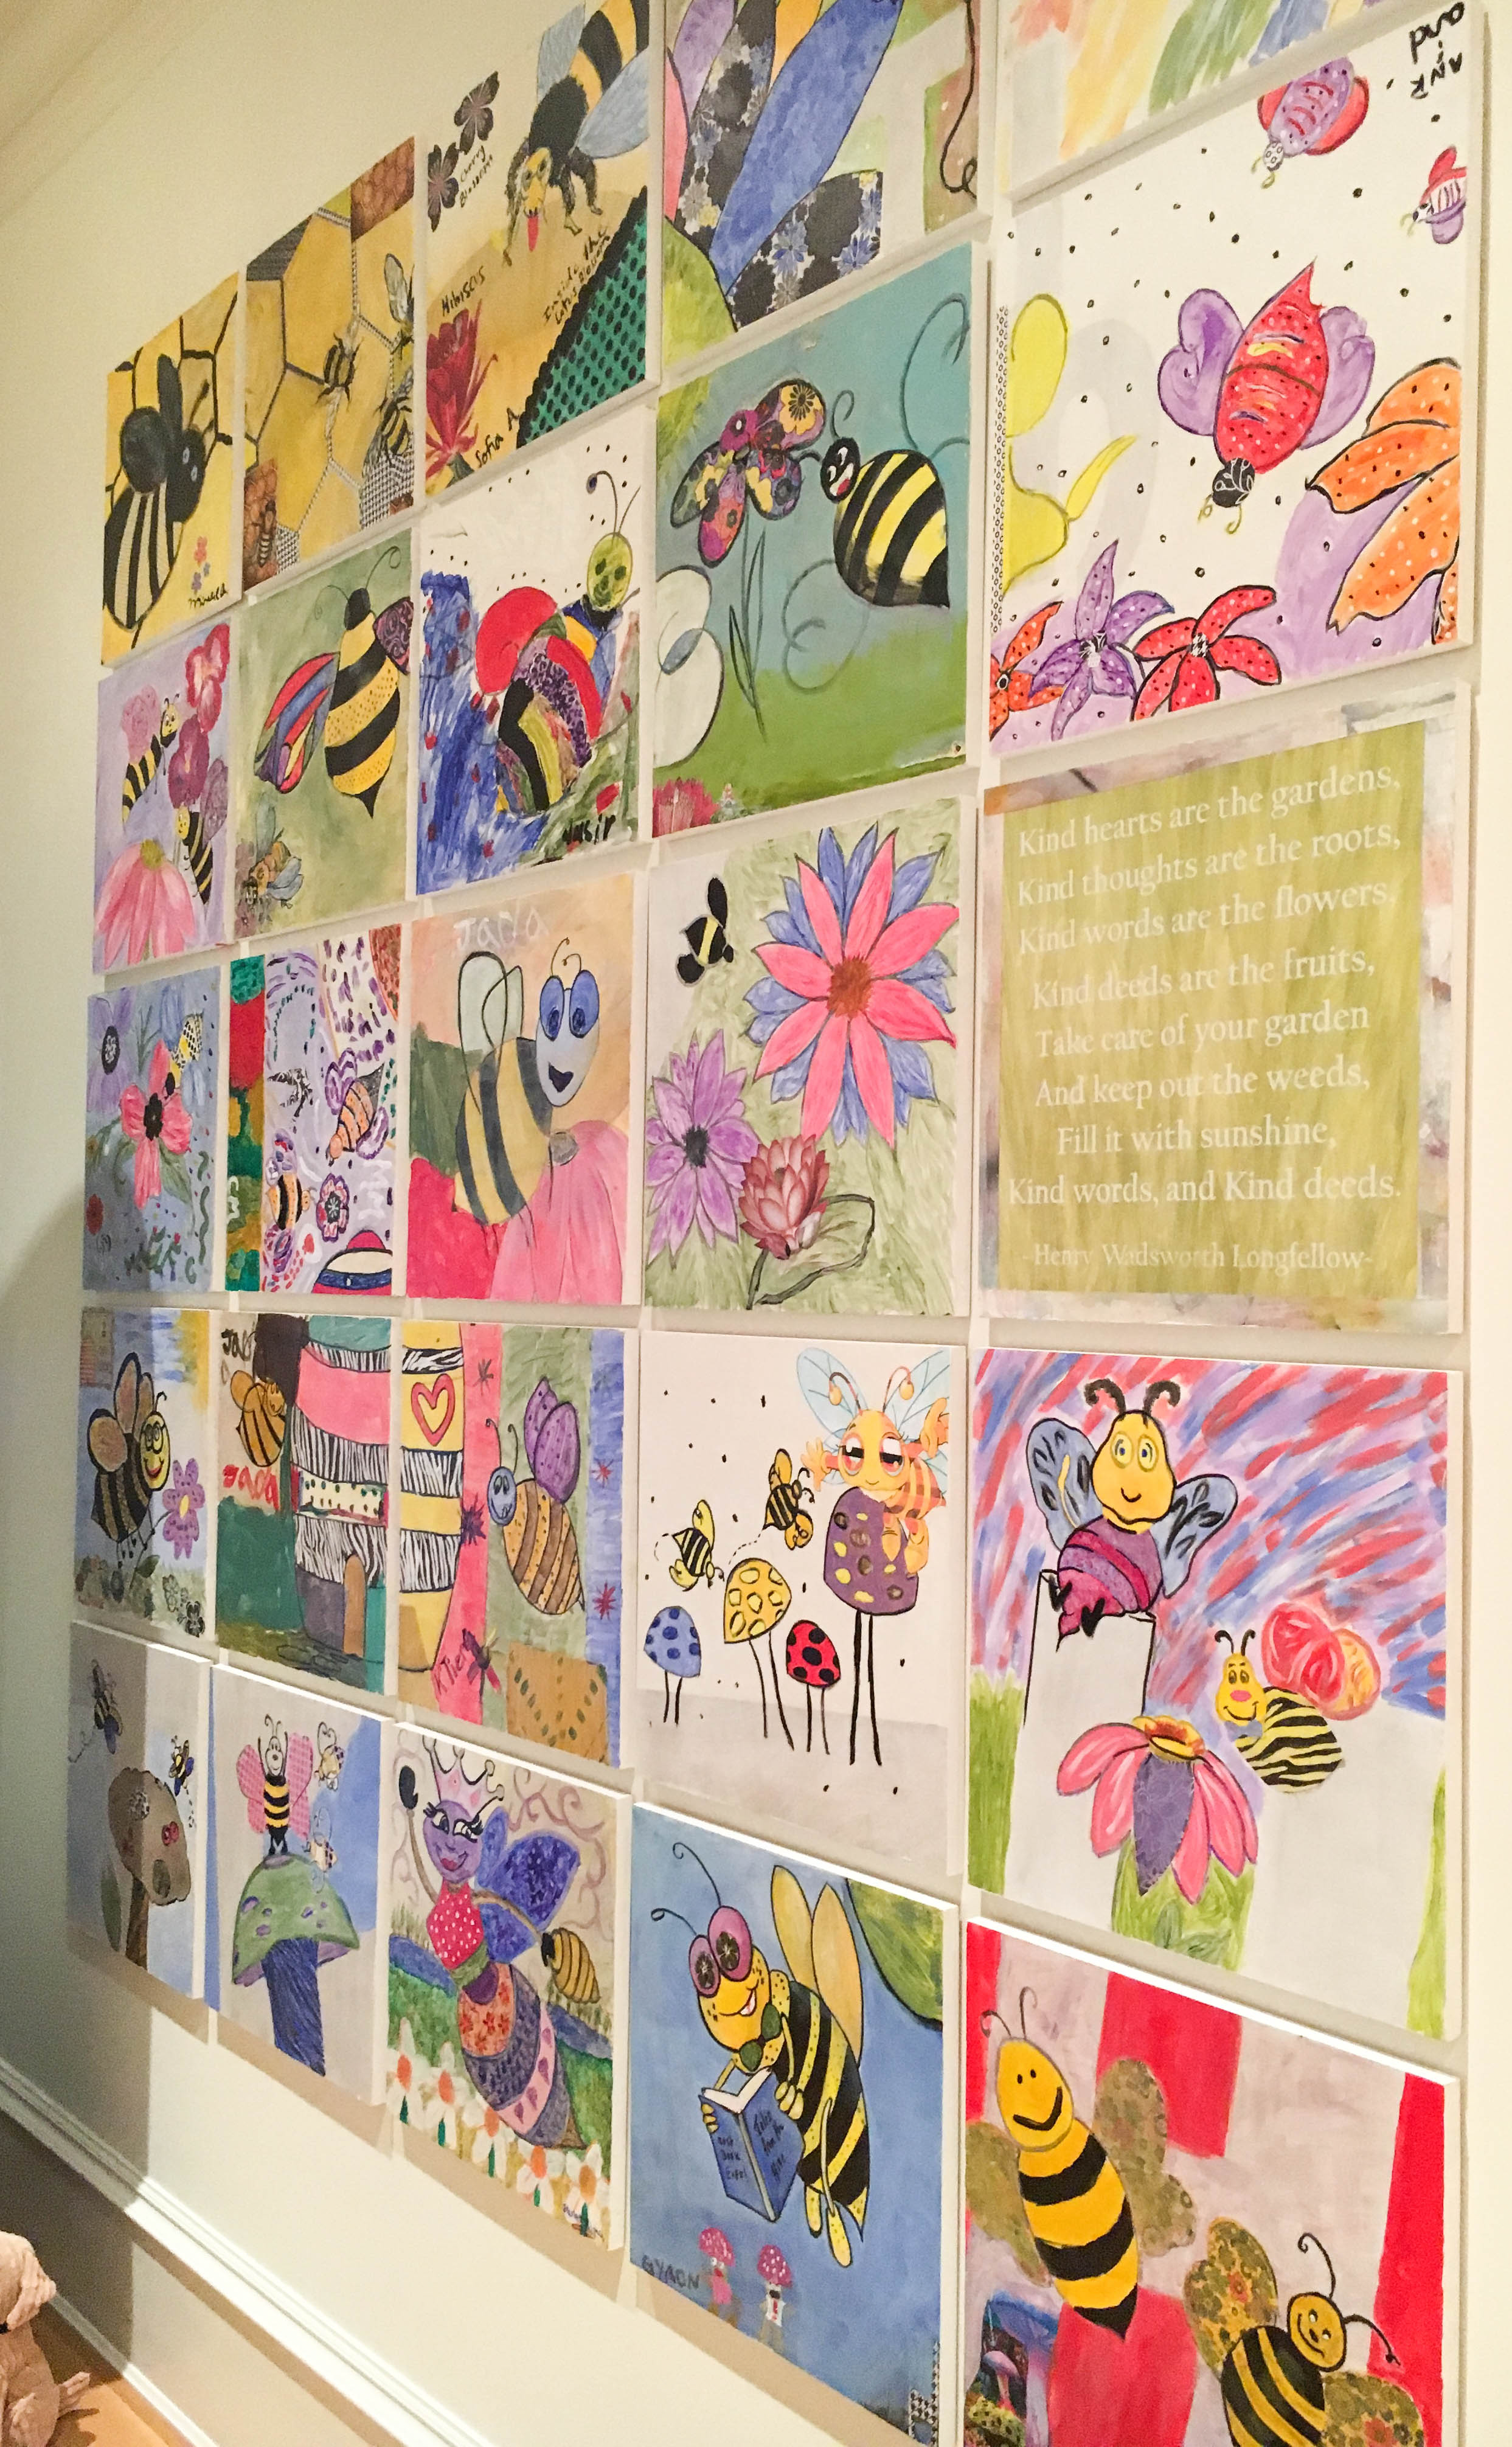 A beautiful and emotional gallery wall installation featuring paintings with a bee theme by patients, caregivers, staff, and volunteers of Children’s National Health System.